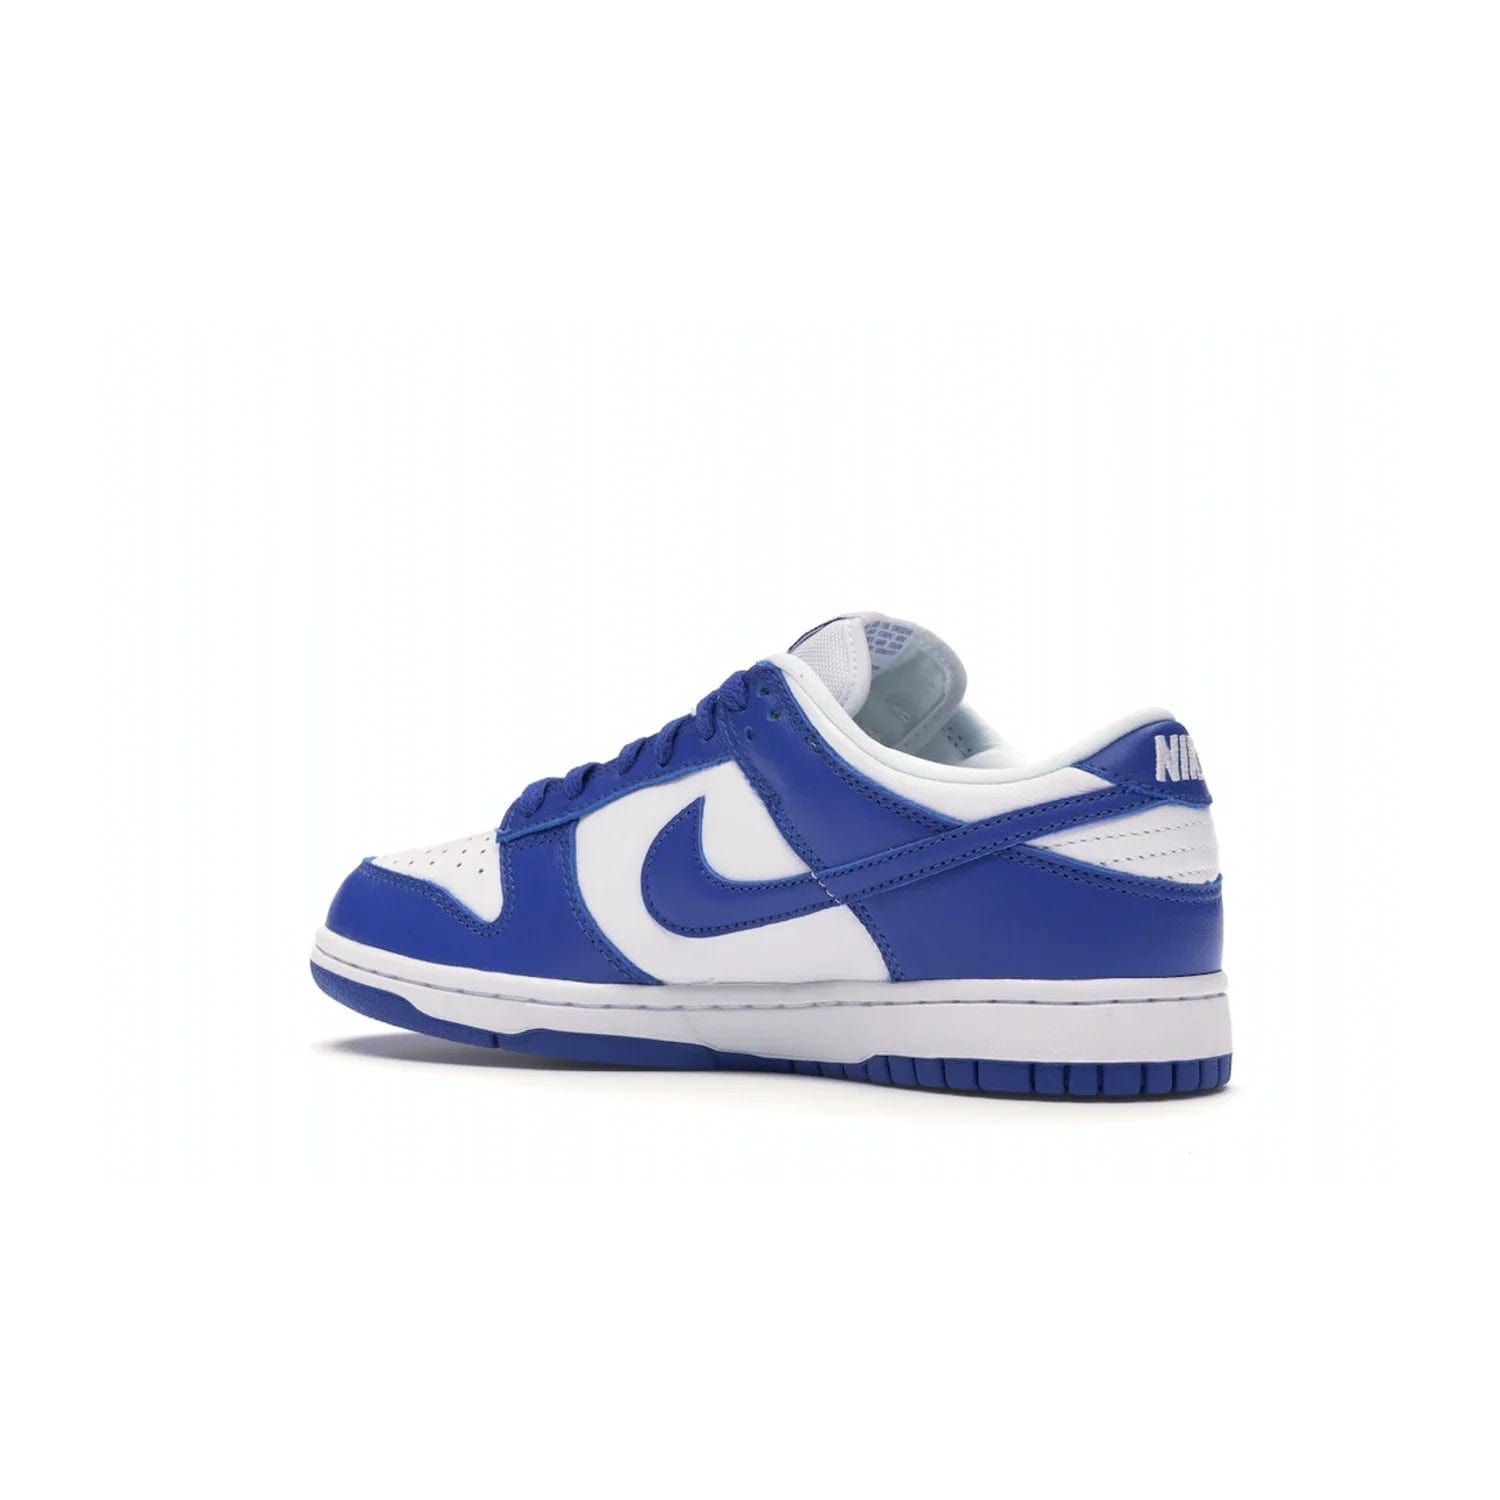 Nike Dunk Low SP Kentucky (2020/2022) - Image 22 - Only at www.BallersClubKickz.com - Classic Nike Dunk Low SP Kentucky with timeless White/Varsity Royal colorway. White leather upper, royal outsole, and Nike branding. A hit since March 2020 homage to the 1985 Nike College Colors program. Show your support with these classic kicks.